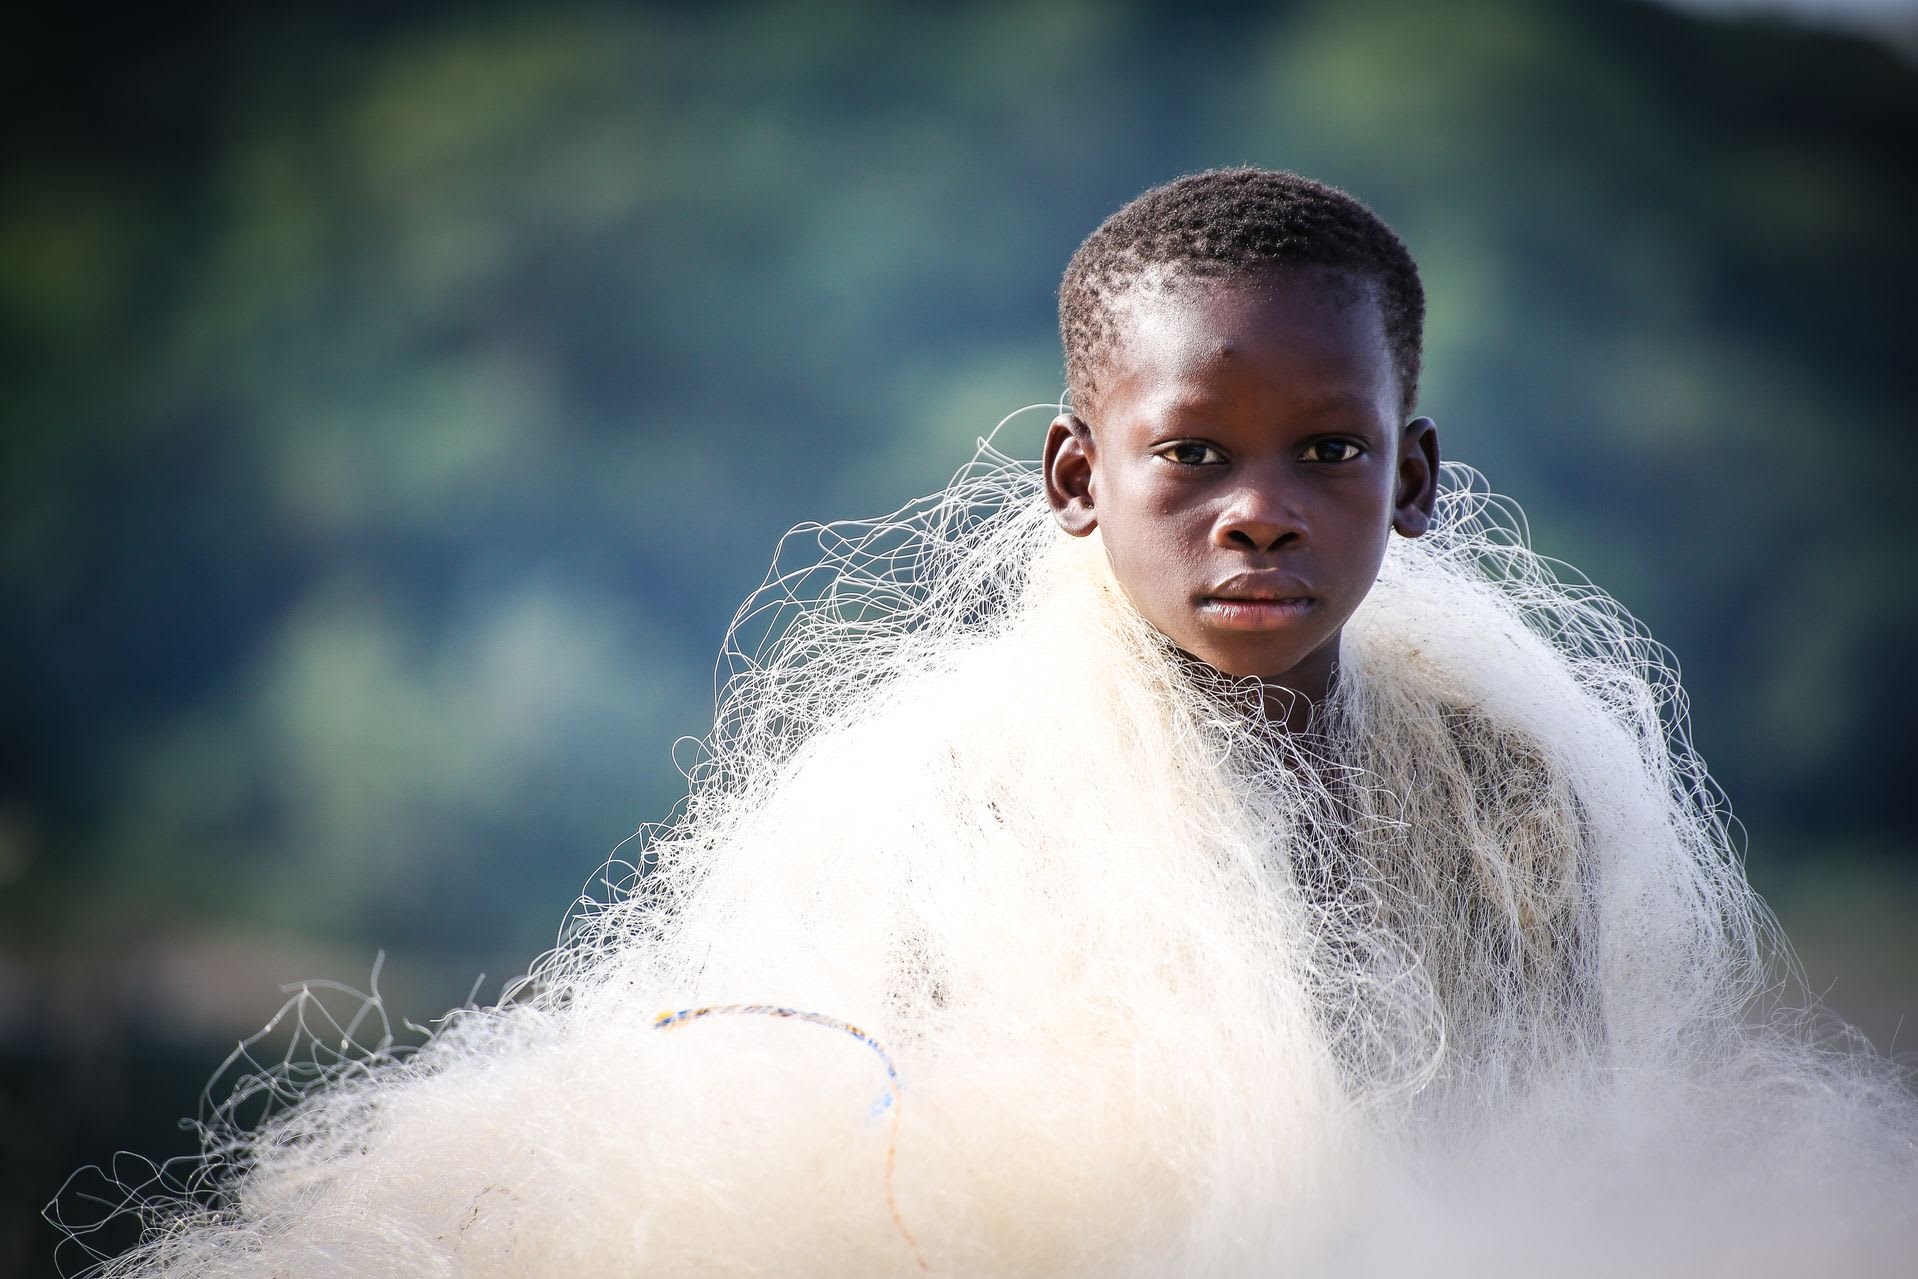 A boy has a white fishing net wrapped around his shoulders. The background is blurry.